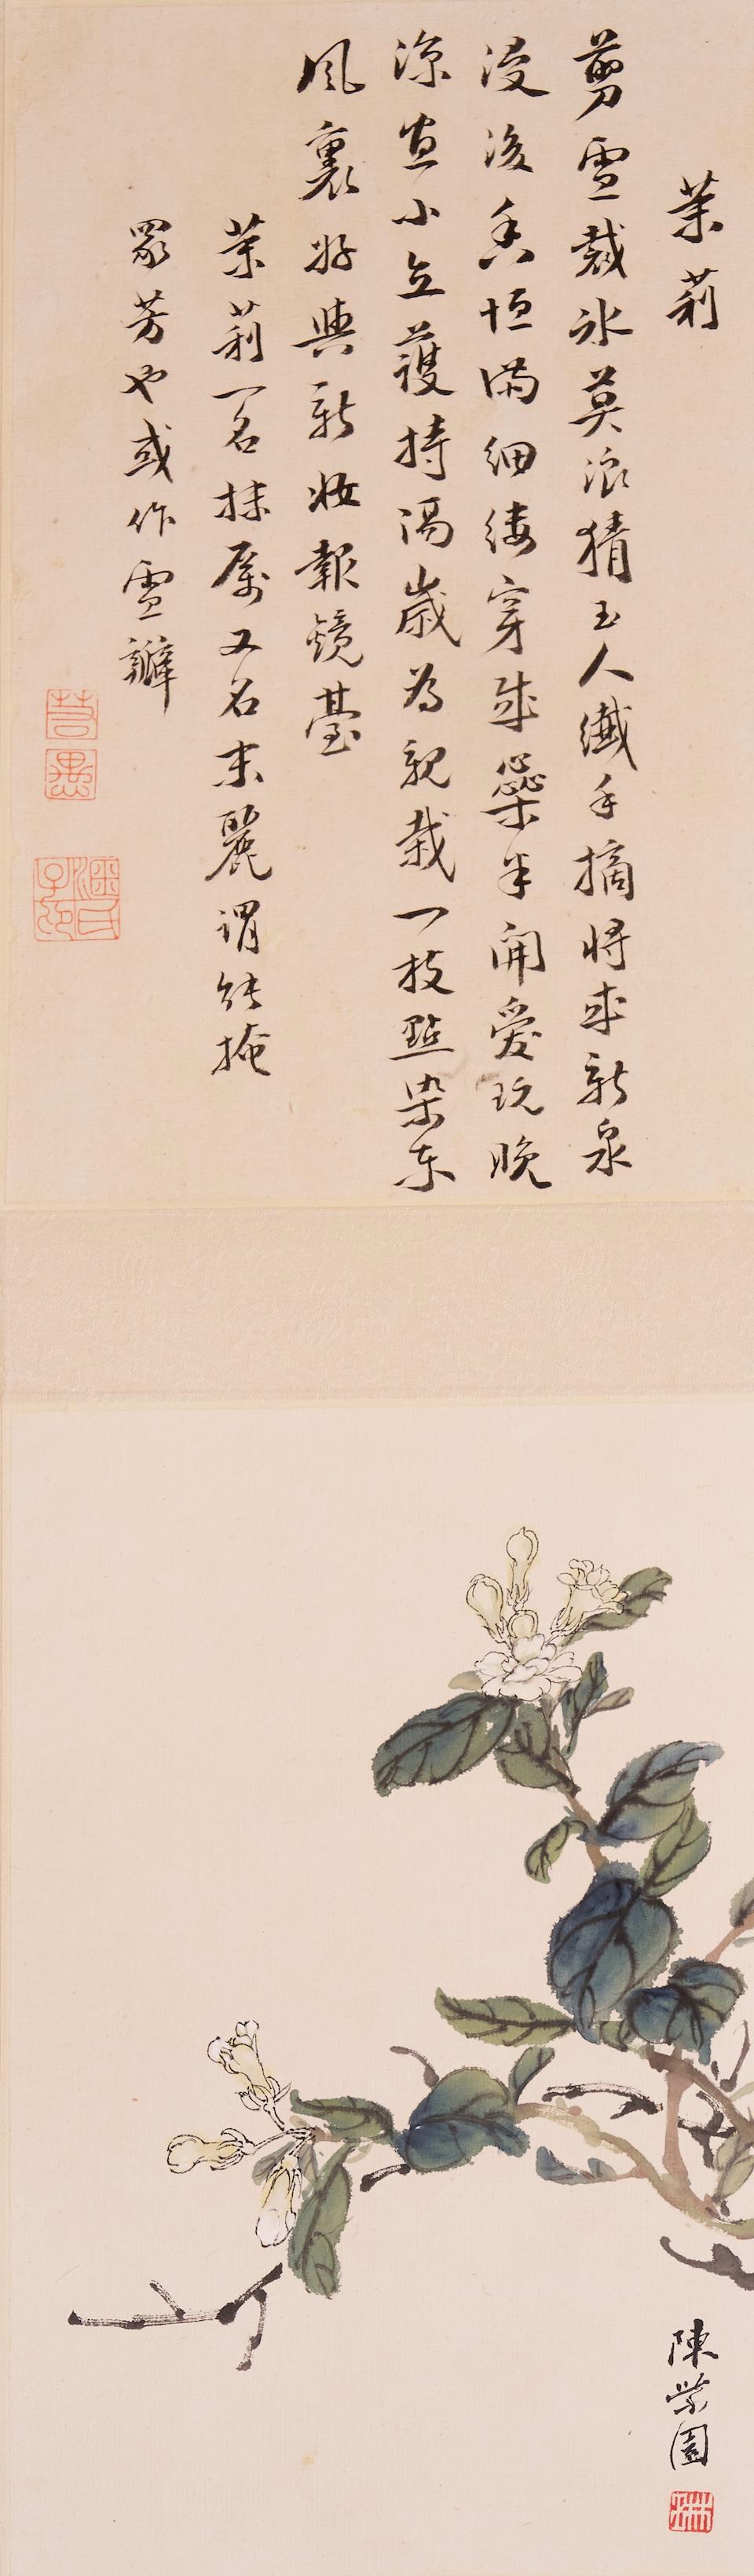 Chen Lin (20th century) and Pan Ruoyu (20th century) Flowers and Calligraphy (4) - Image 2 of 5